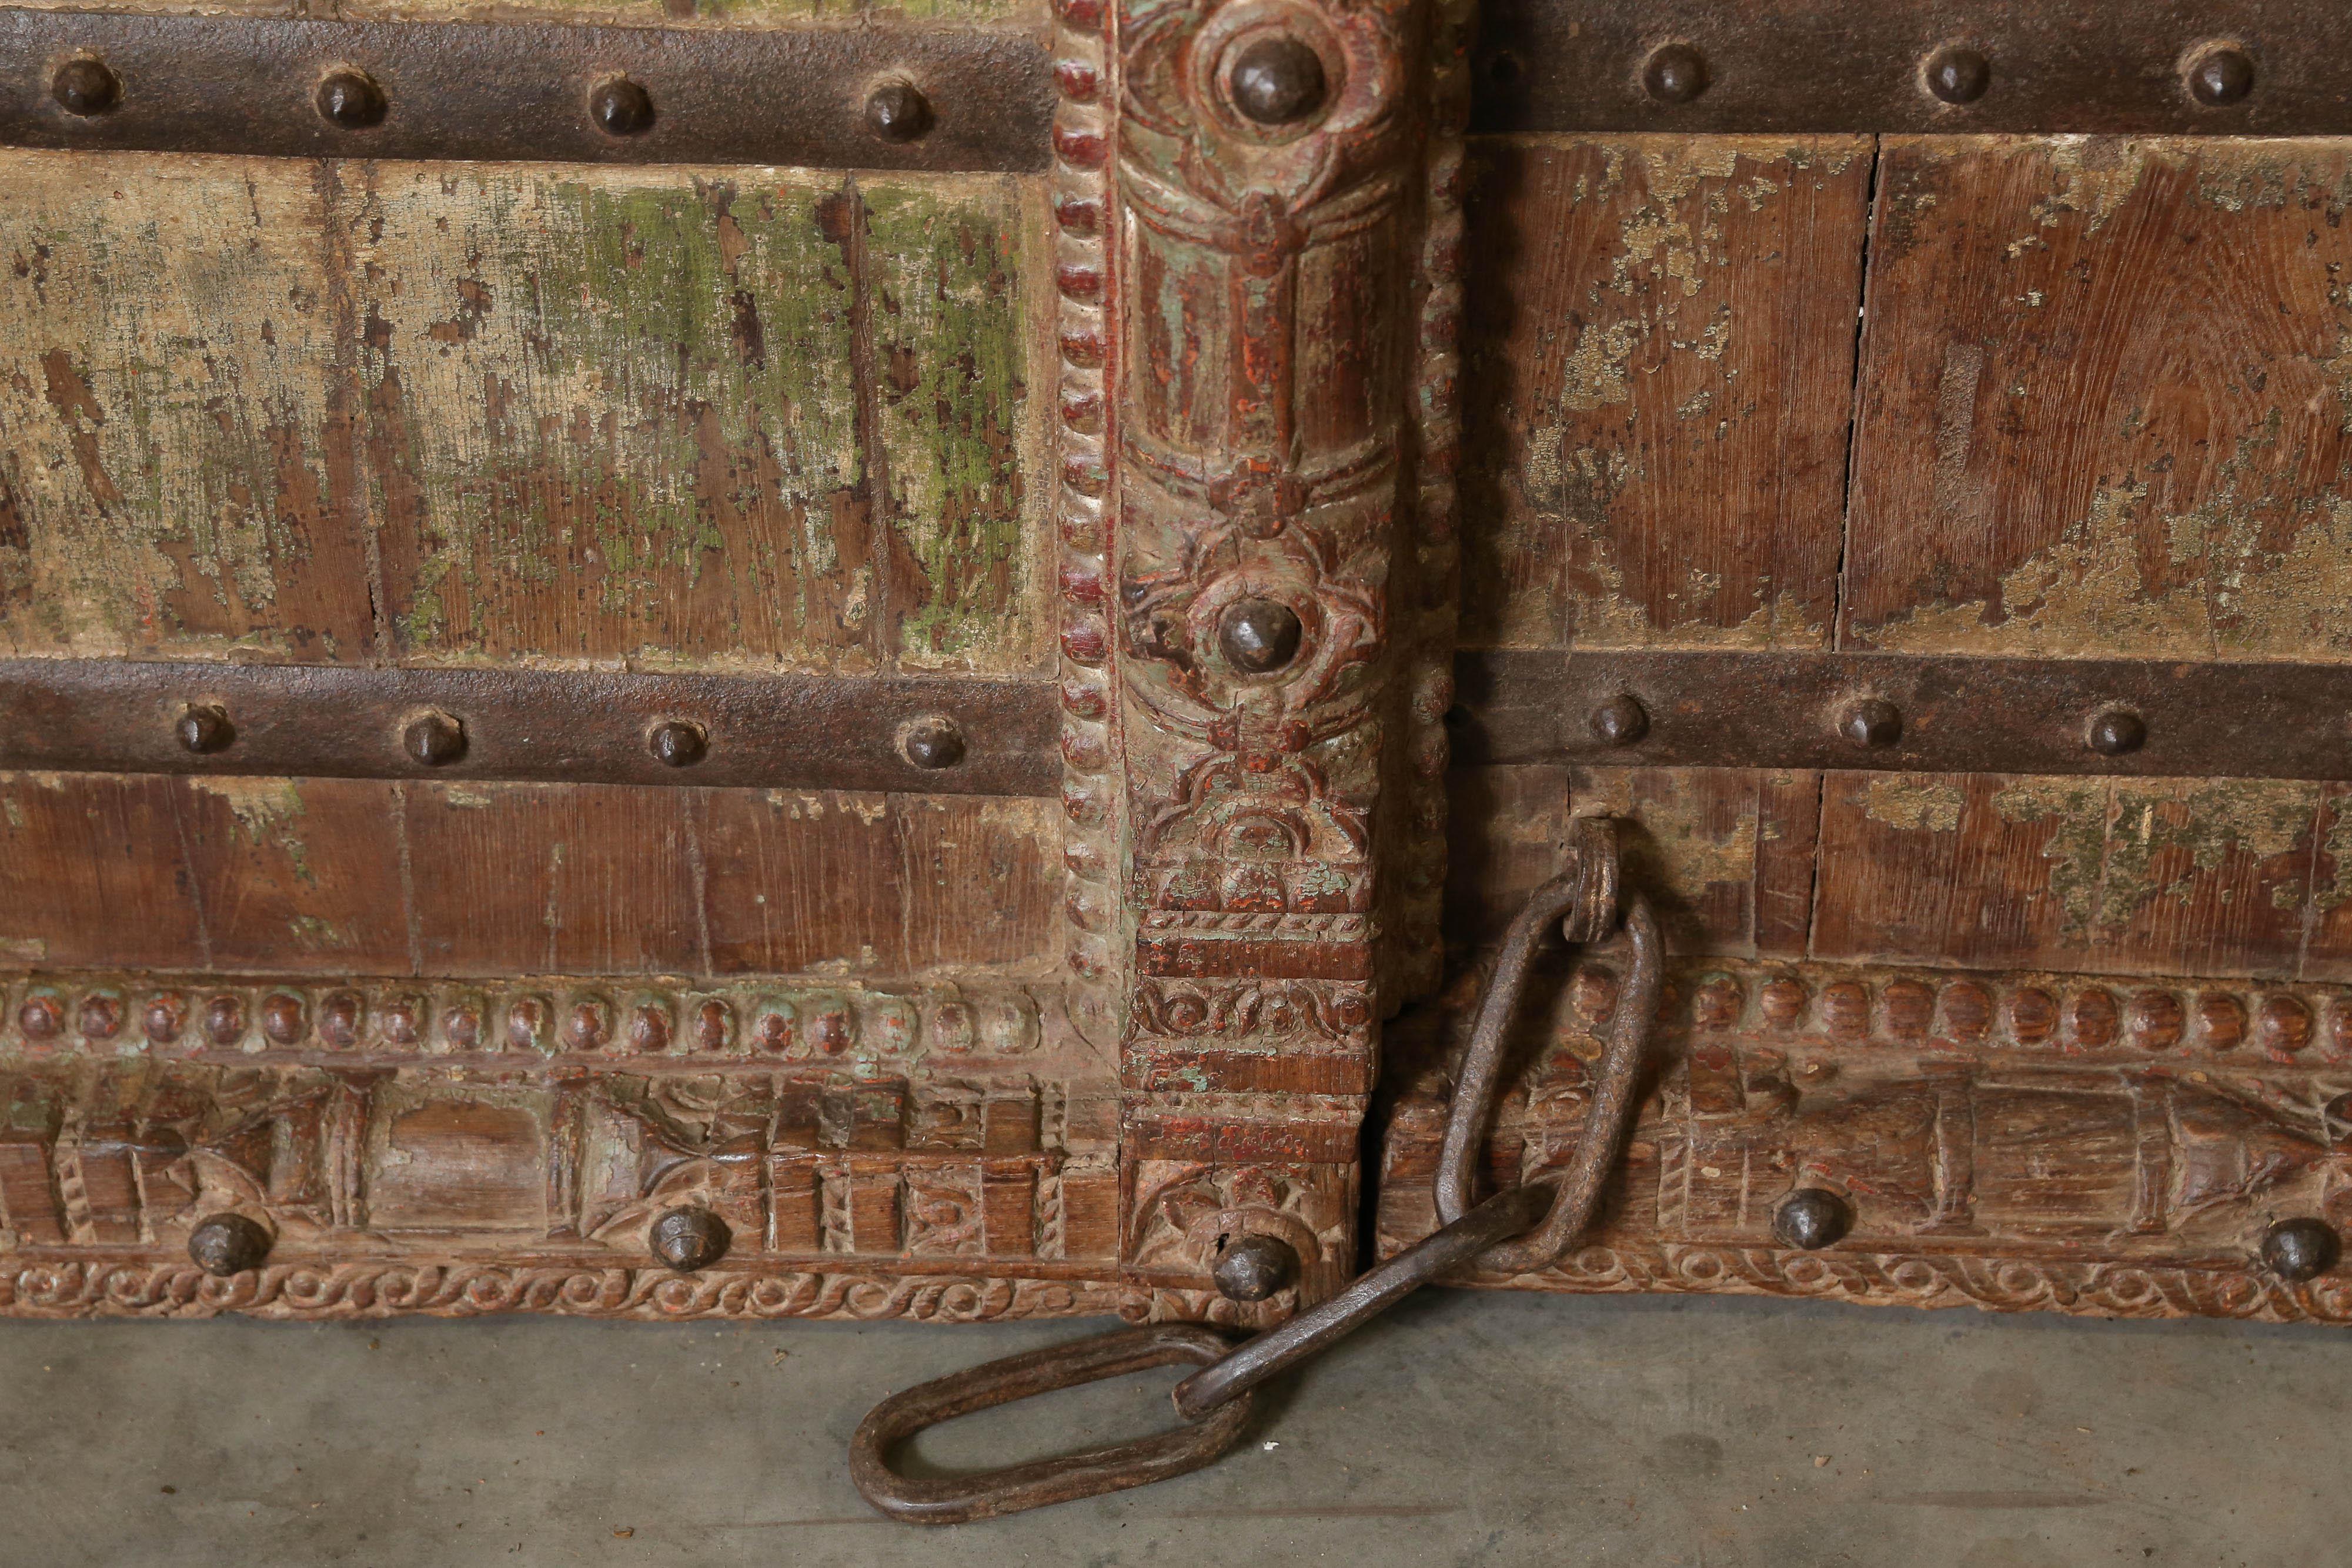 Late 18th Century 210 Years Old Heavily Fortified Solid Teak Wood Door from a Village Temple